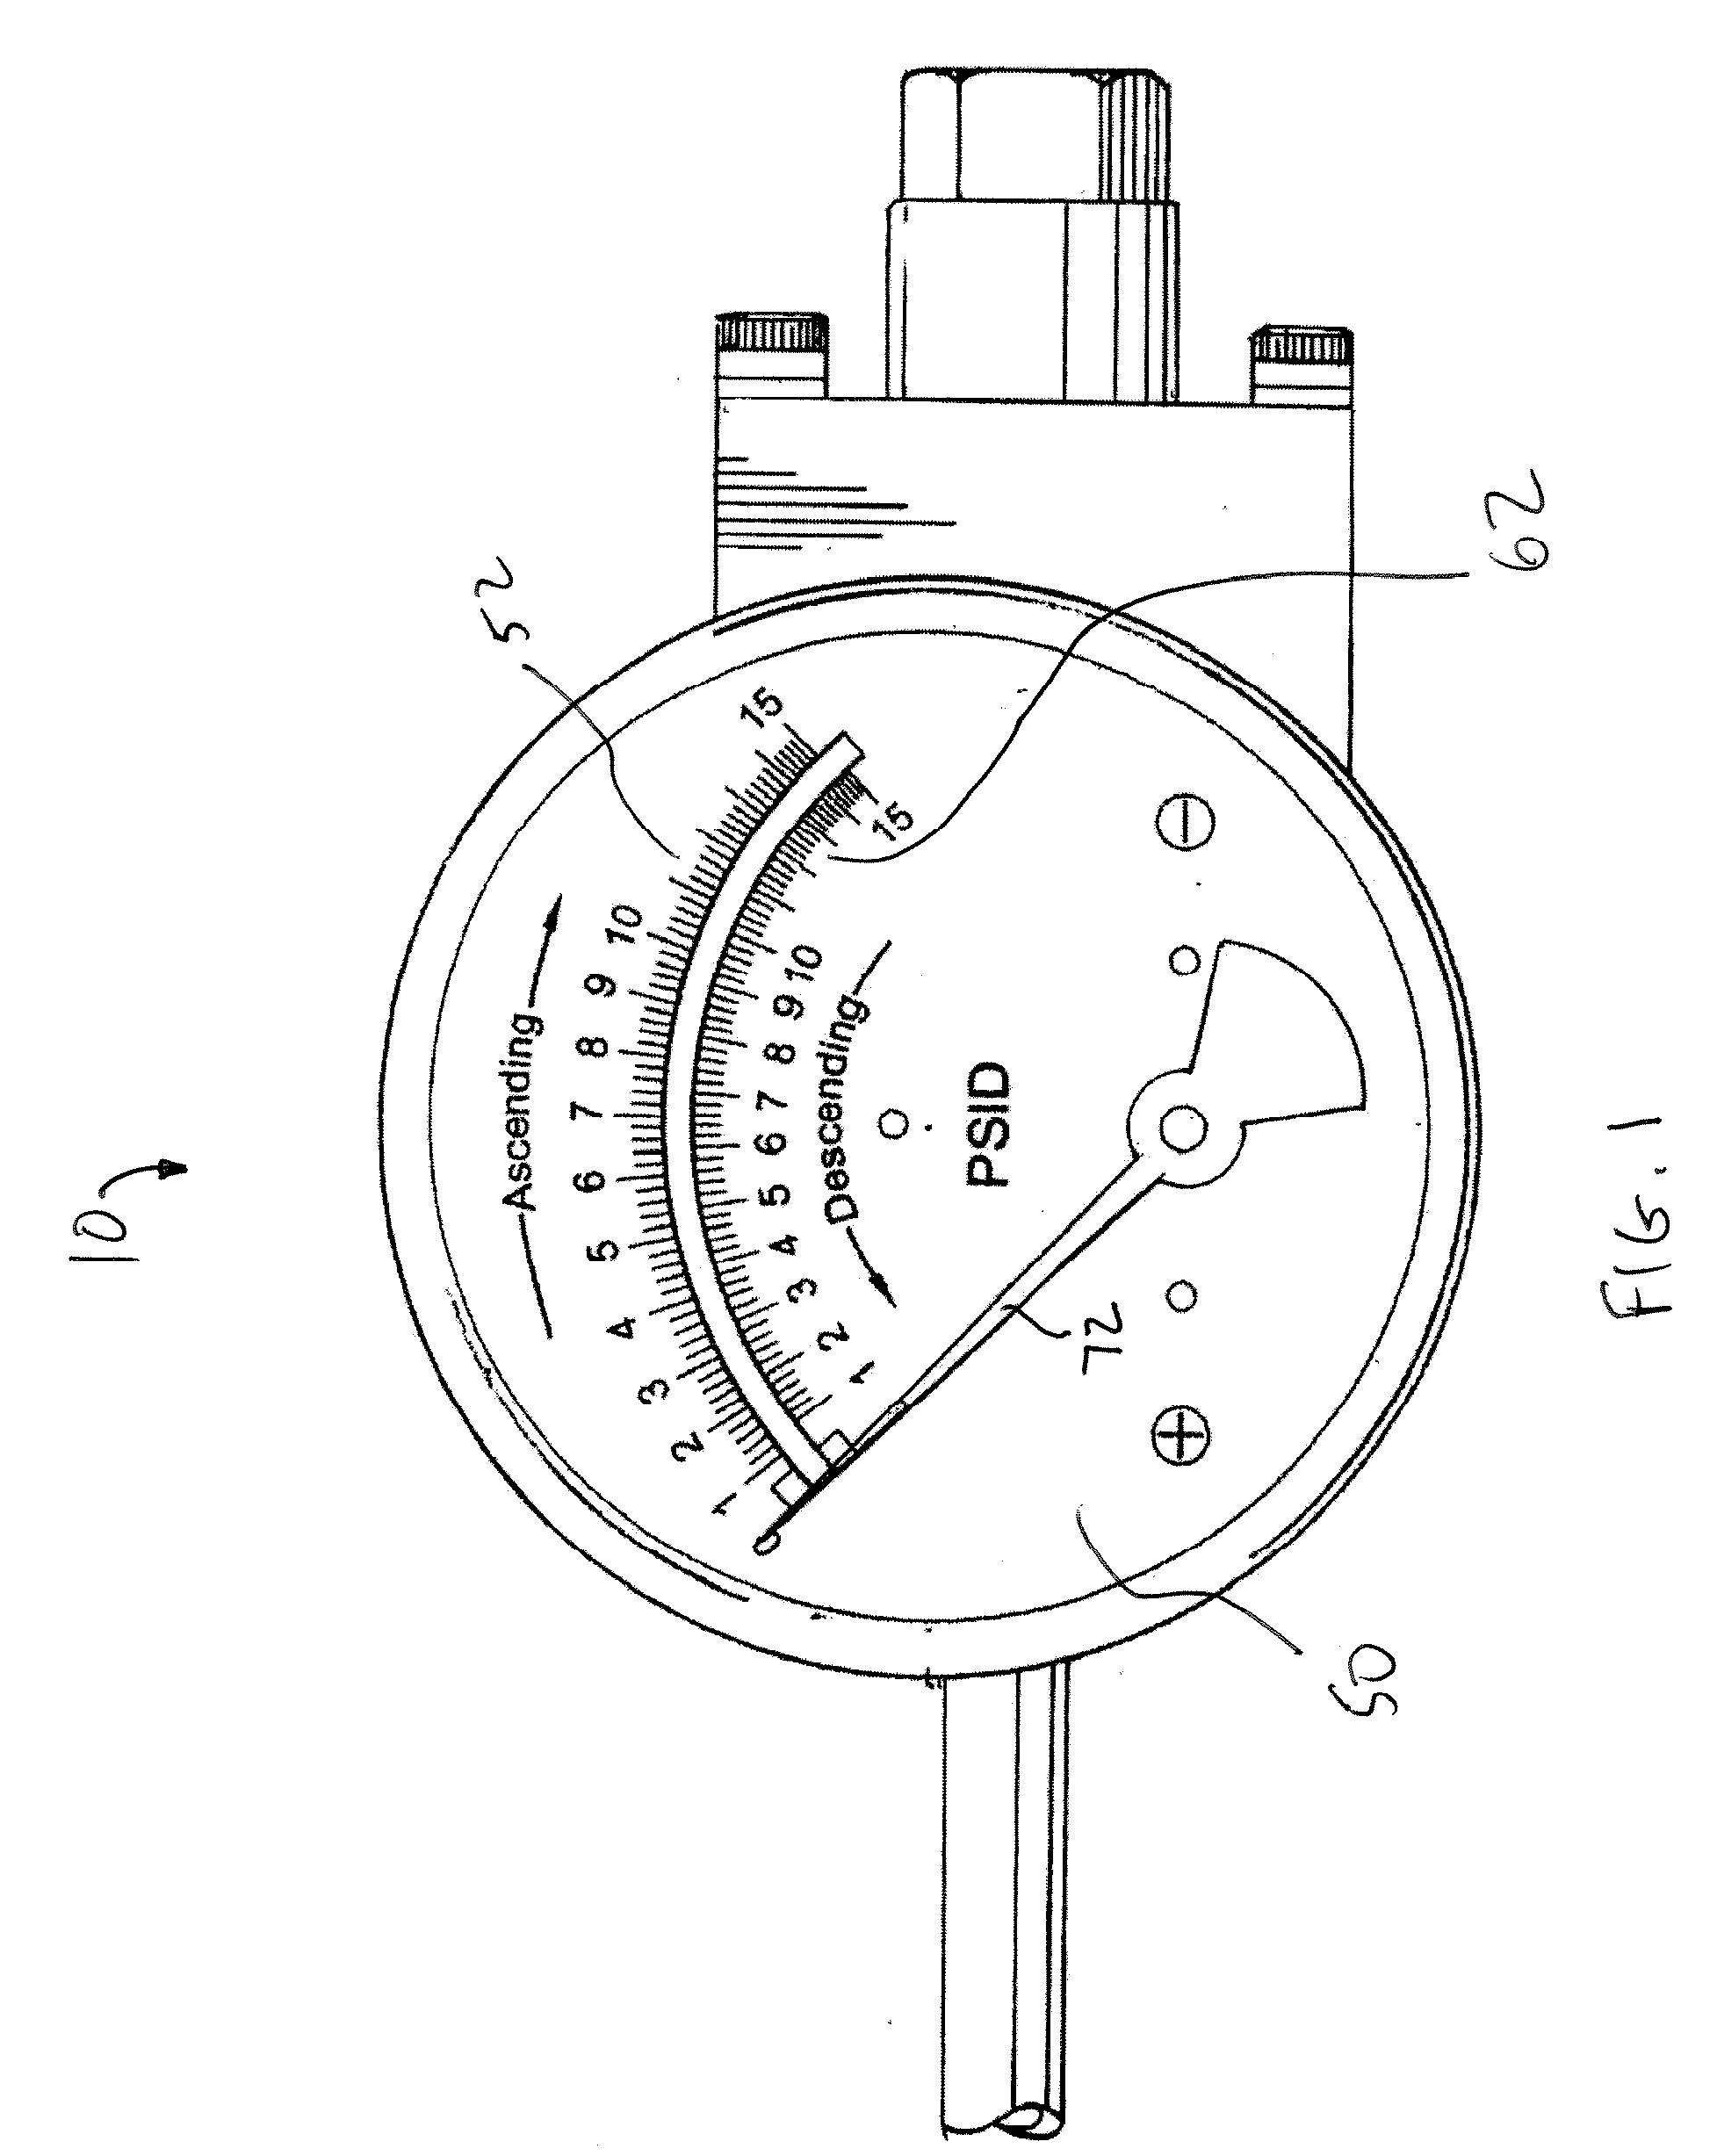 Method and Apparatus for a Gauge for Indicating a Pressure of a Fluid